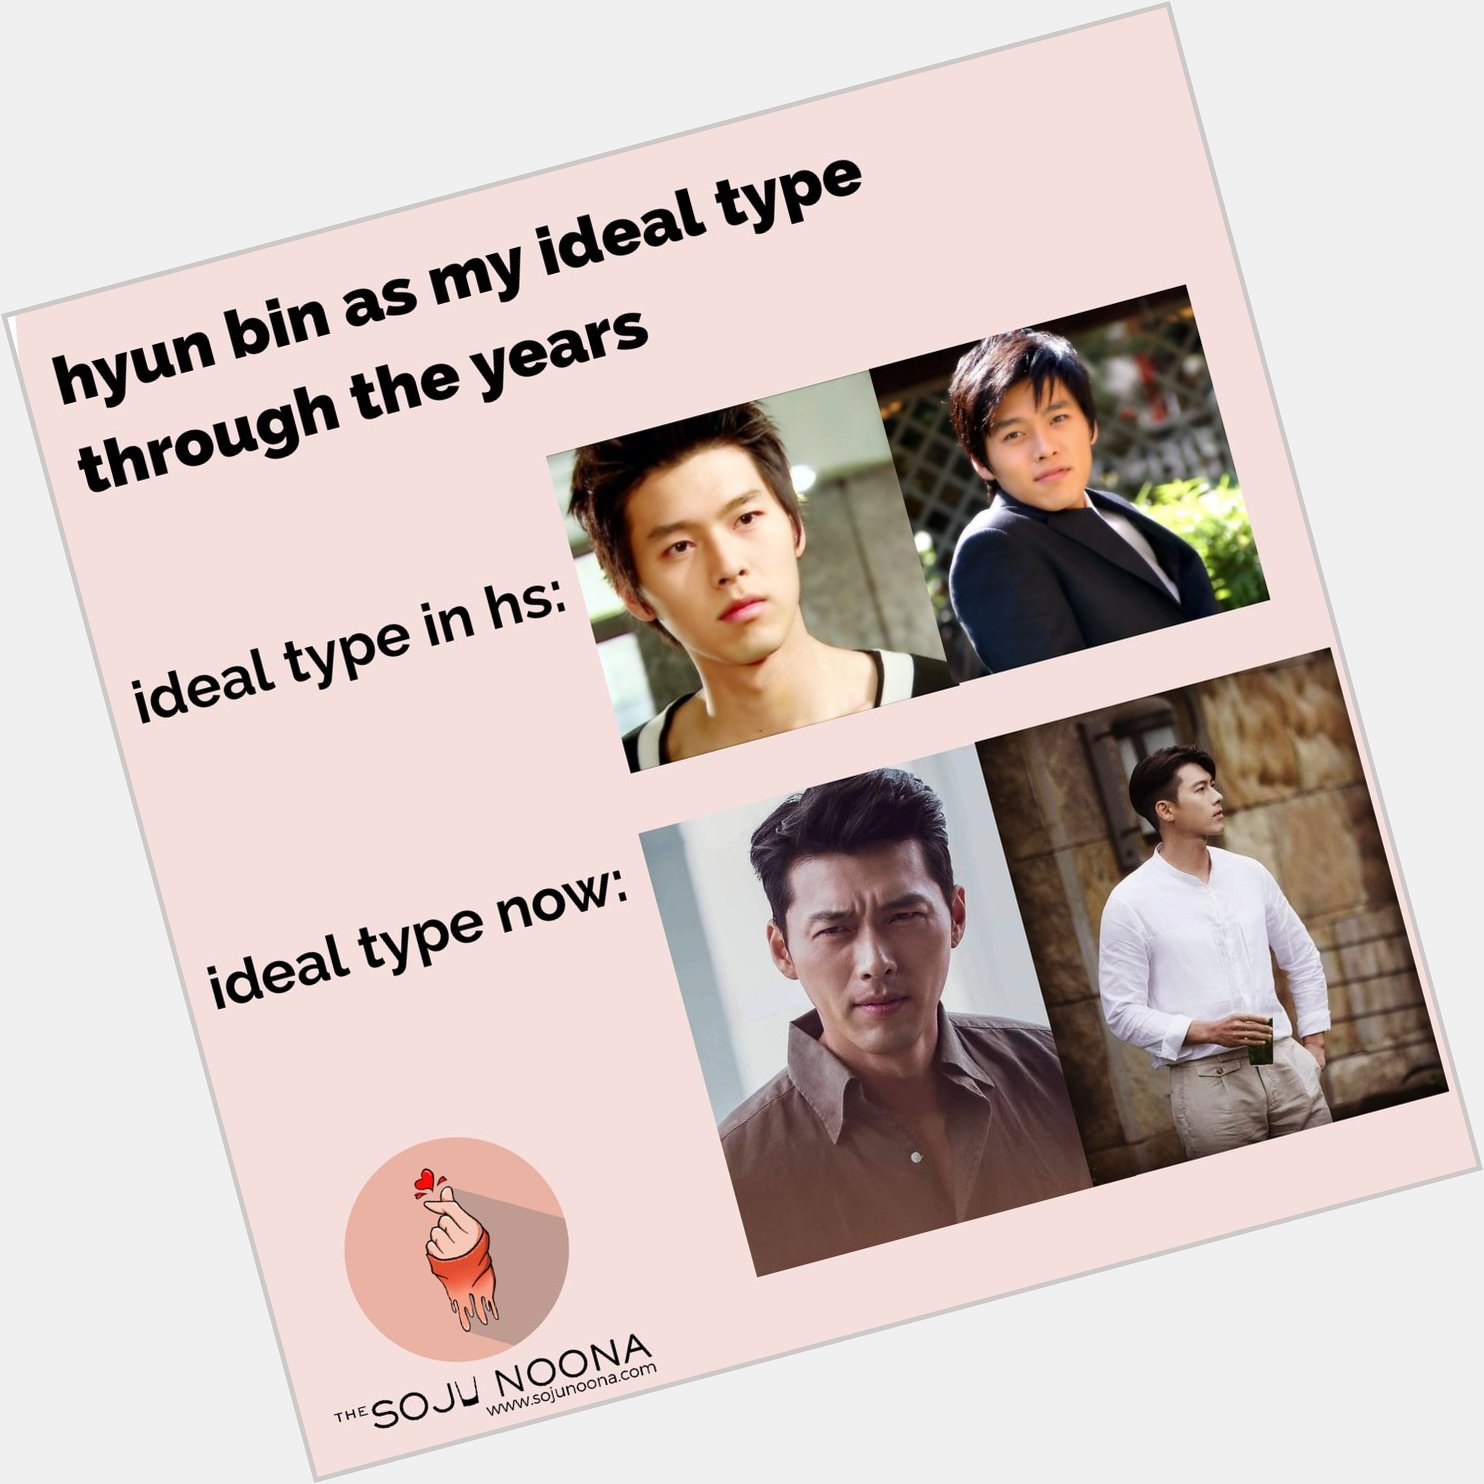 Happy birthday hyun bin! thank you for being my ideal type through the years! 